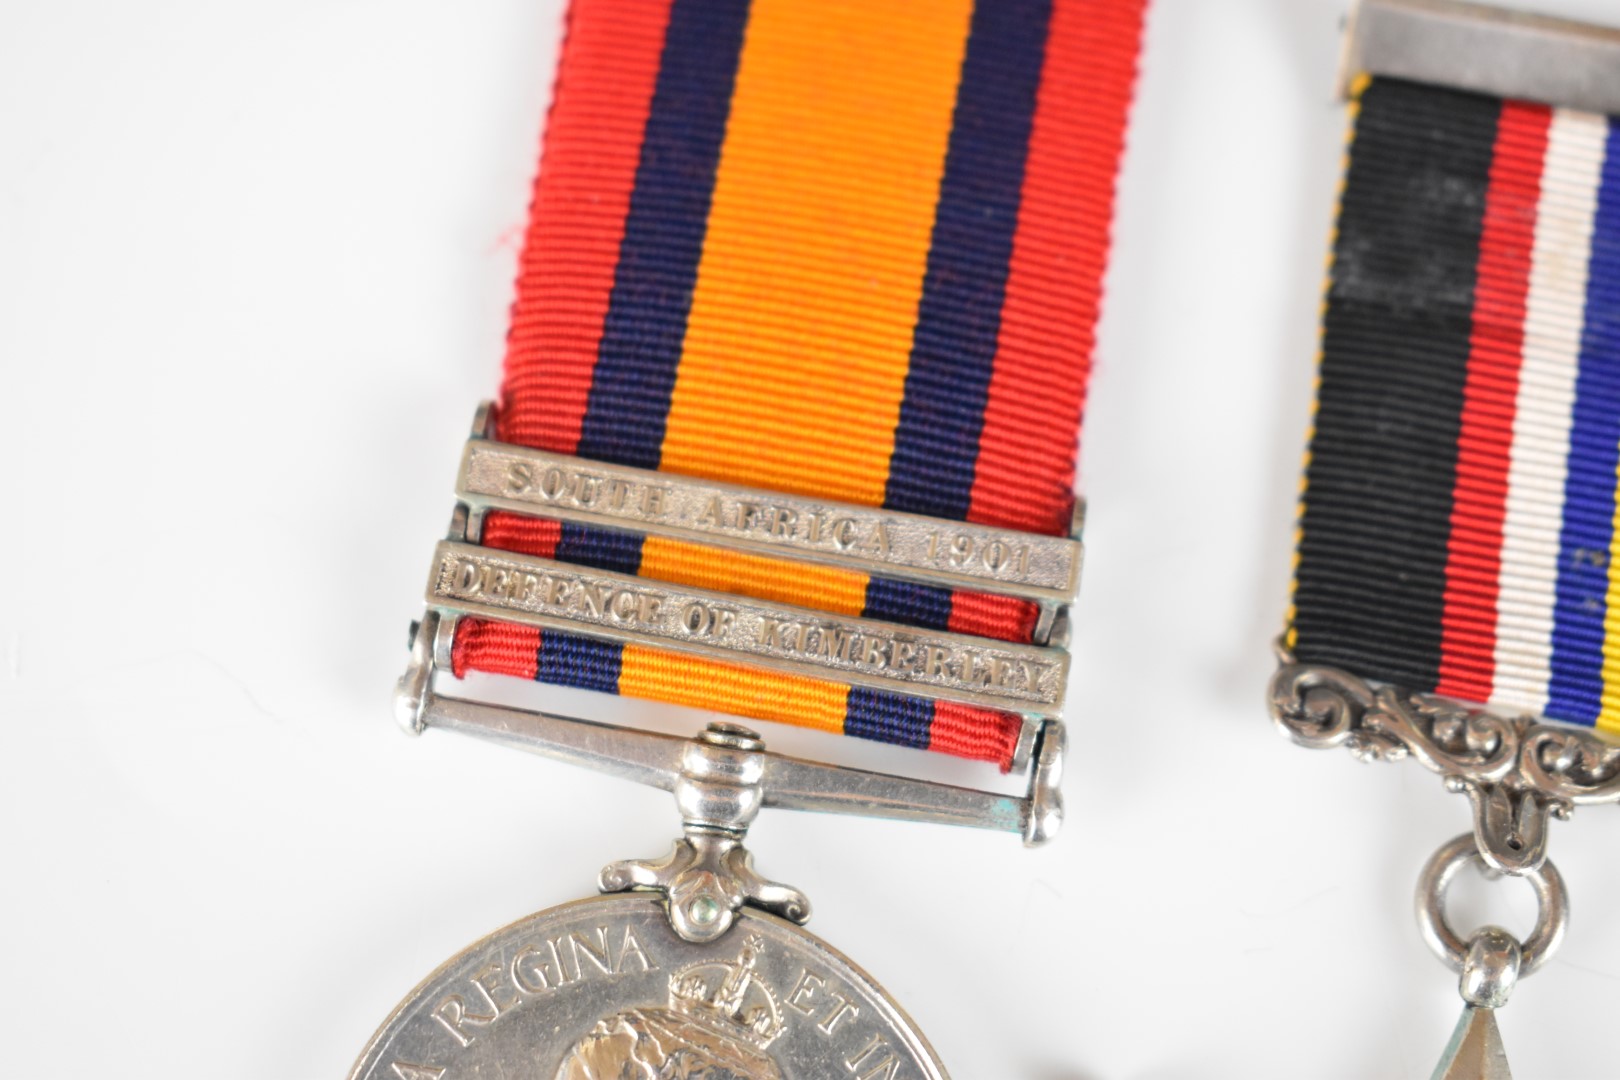 Queen's South Africa Medal with clasps for Defence of Kimberley and South Africa 1901 named to 828 - Image 6 of 22